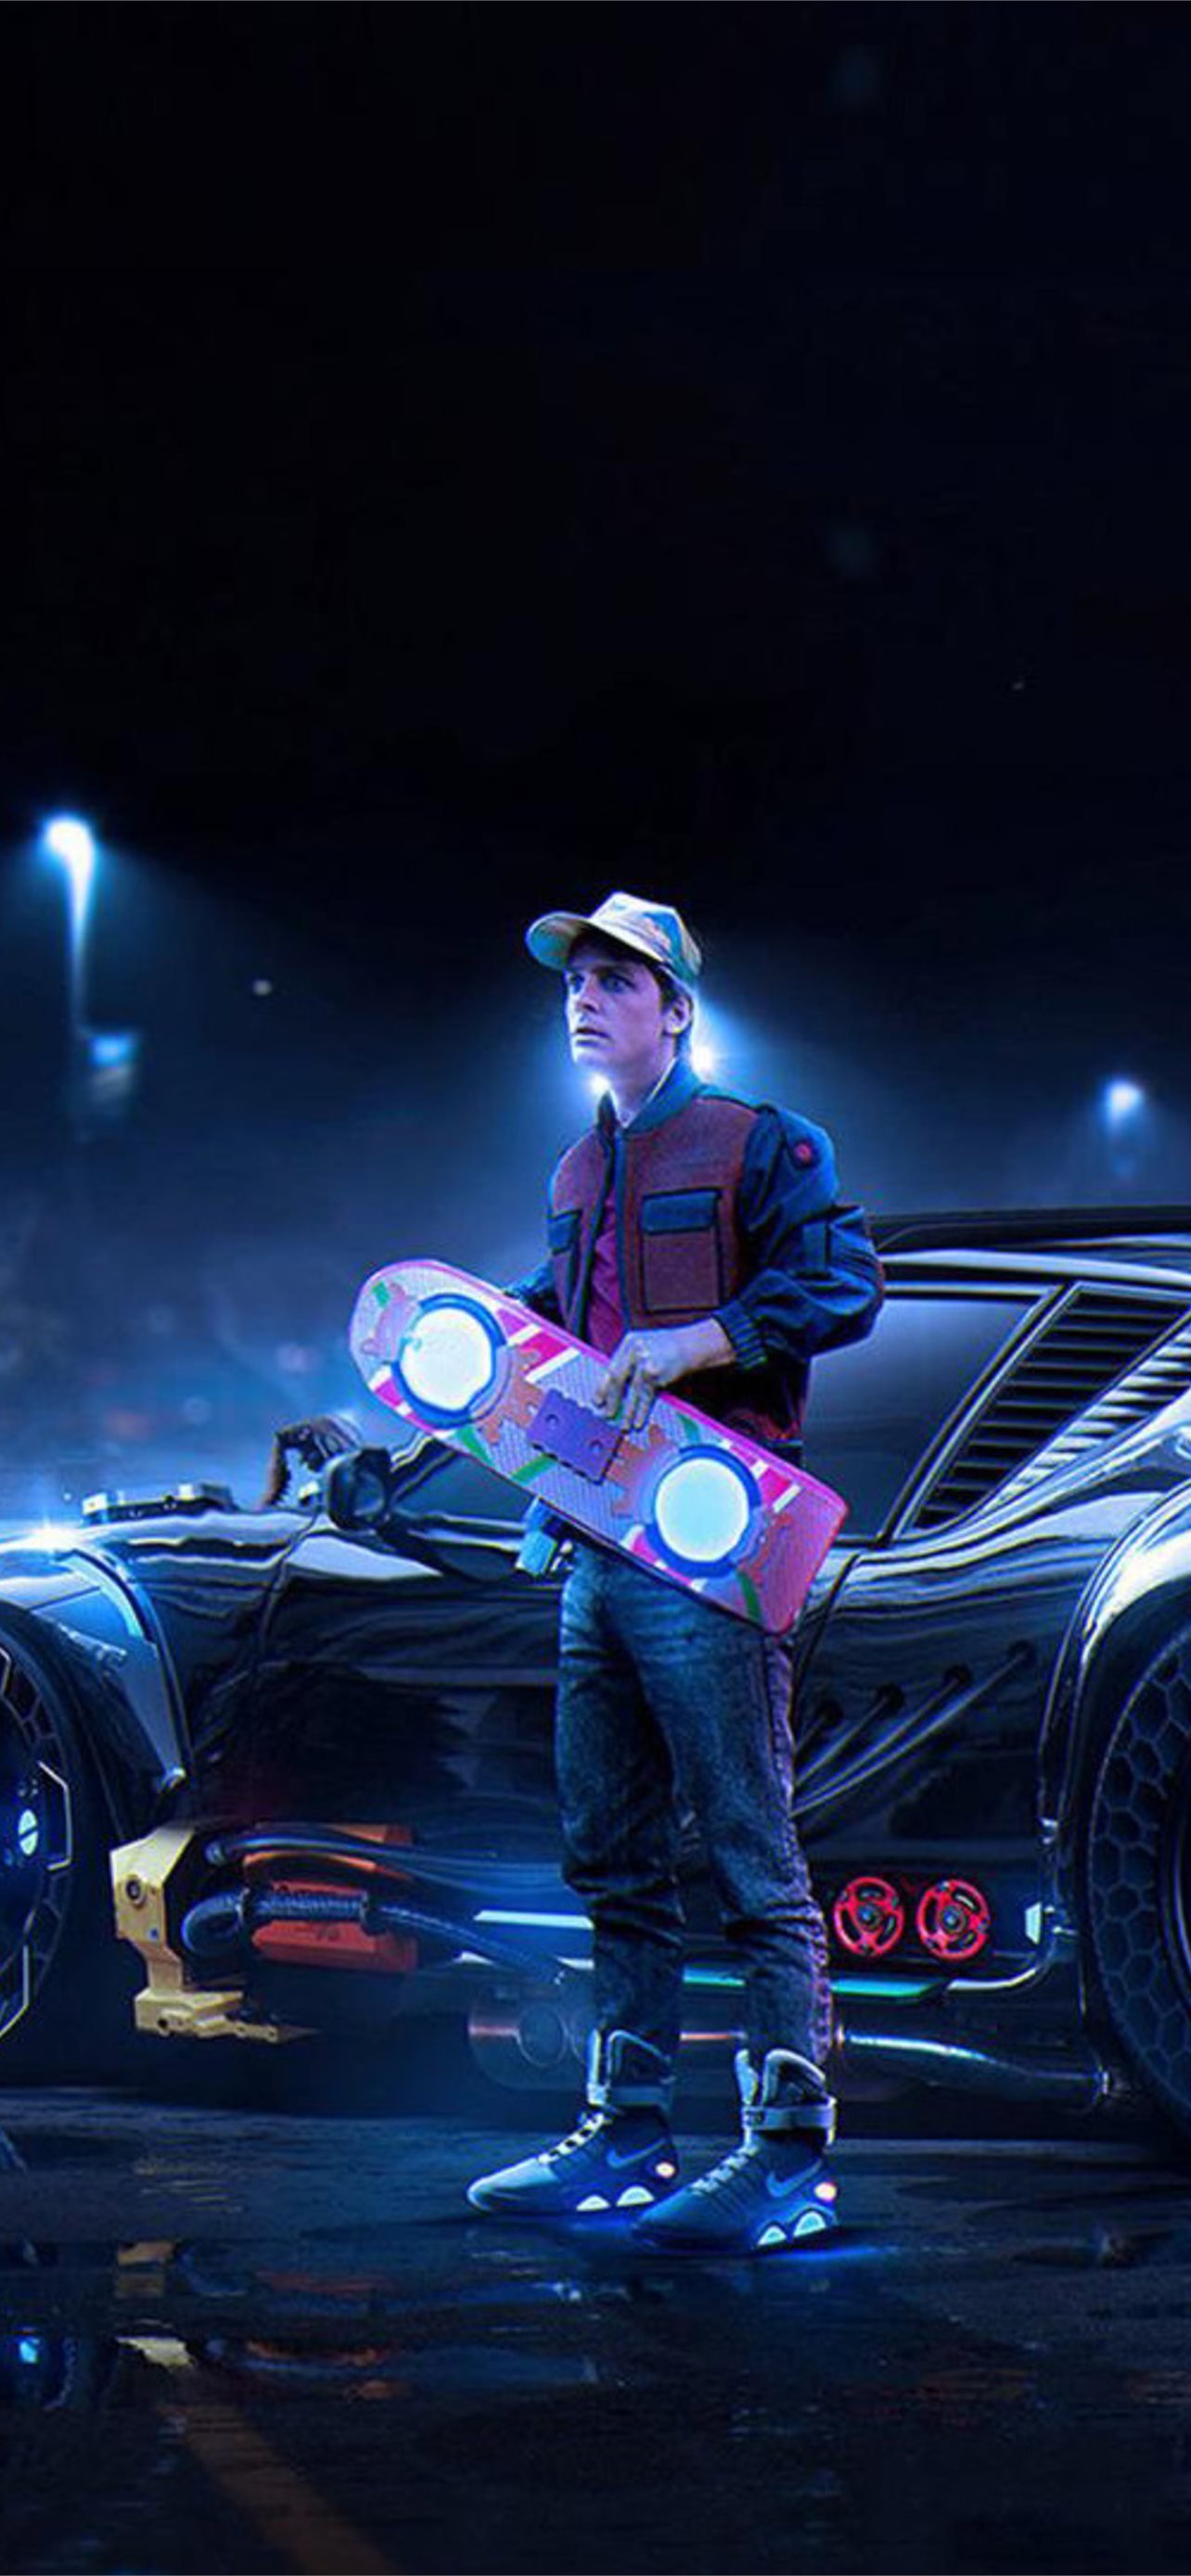 Back To The Future DeLorean Marty McFly Samsung Ga. iPhone Wallpaper Free Download